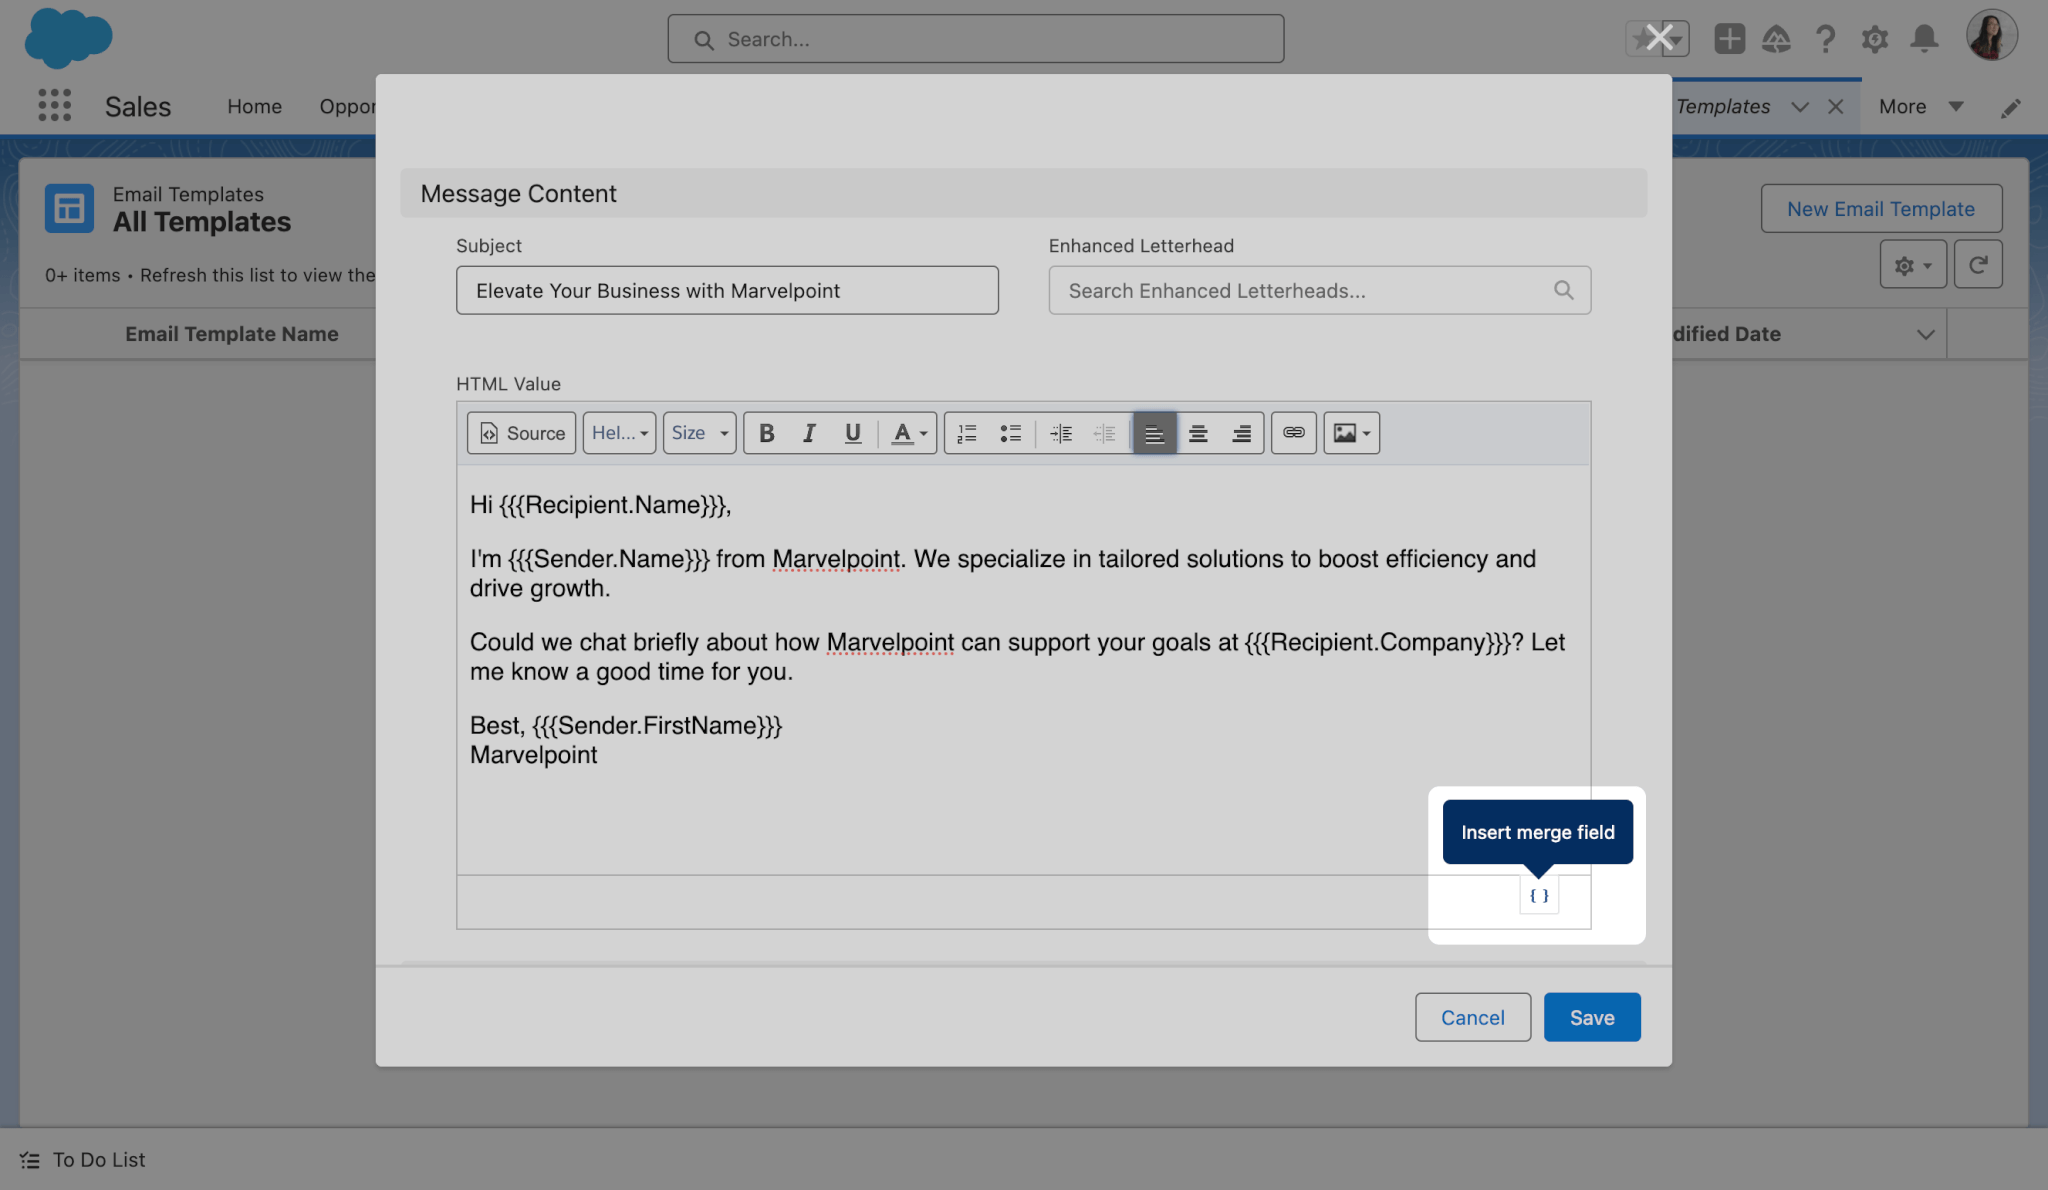 New Email Template modal with the Insert Merge Field button highlighted